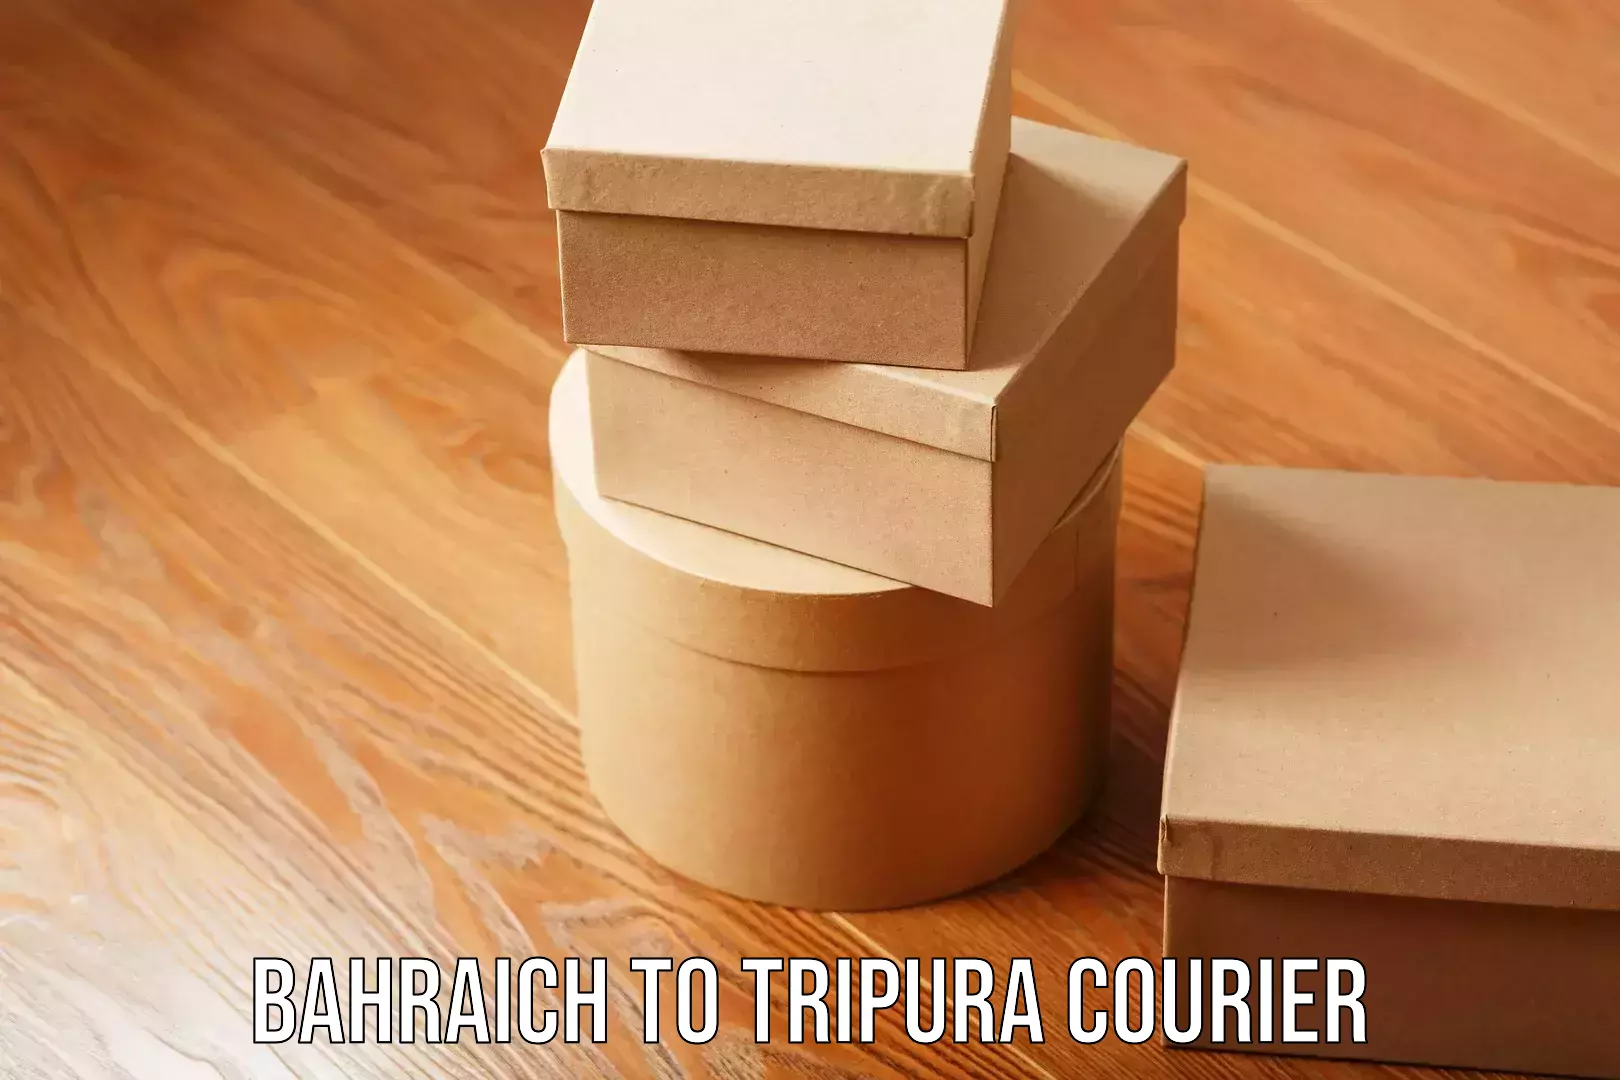 Reliable courier service in Bahraich to Tripura